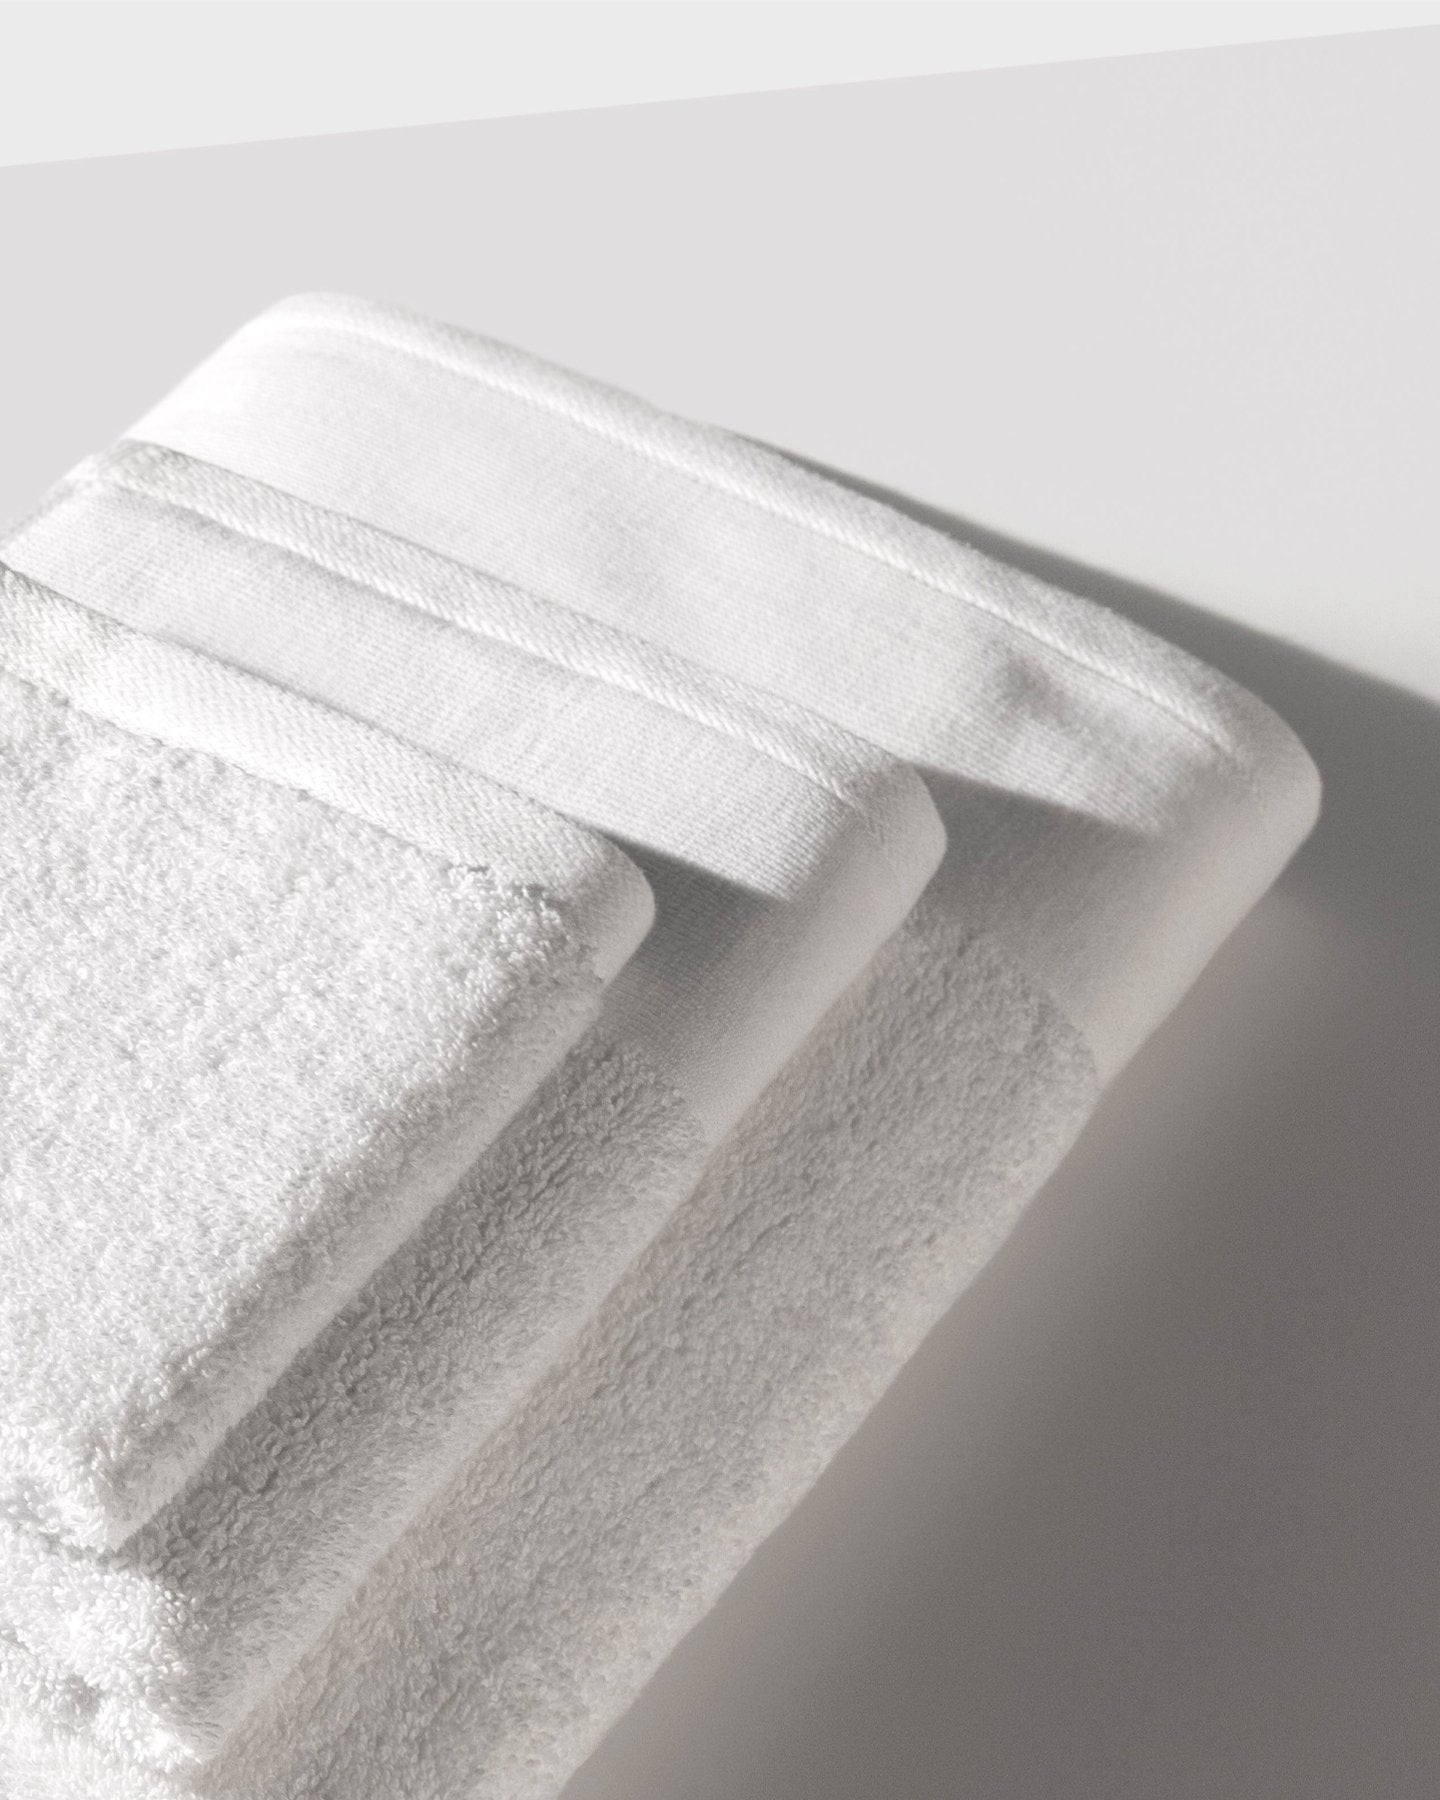 The Best Towels for Skin, Straight From a Derm